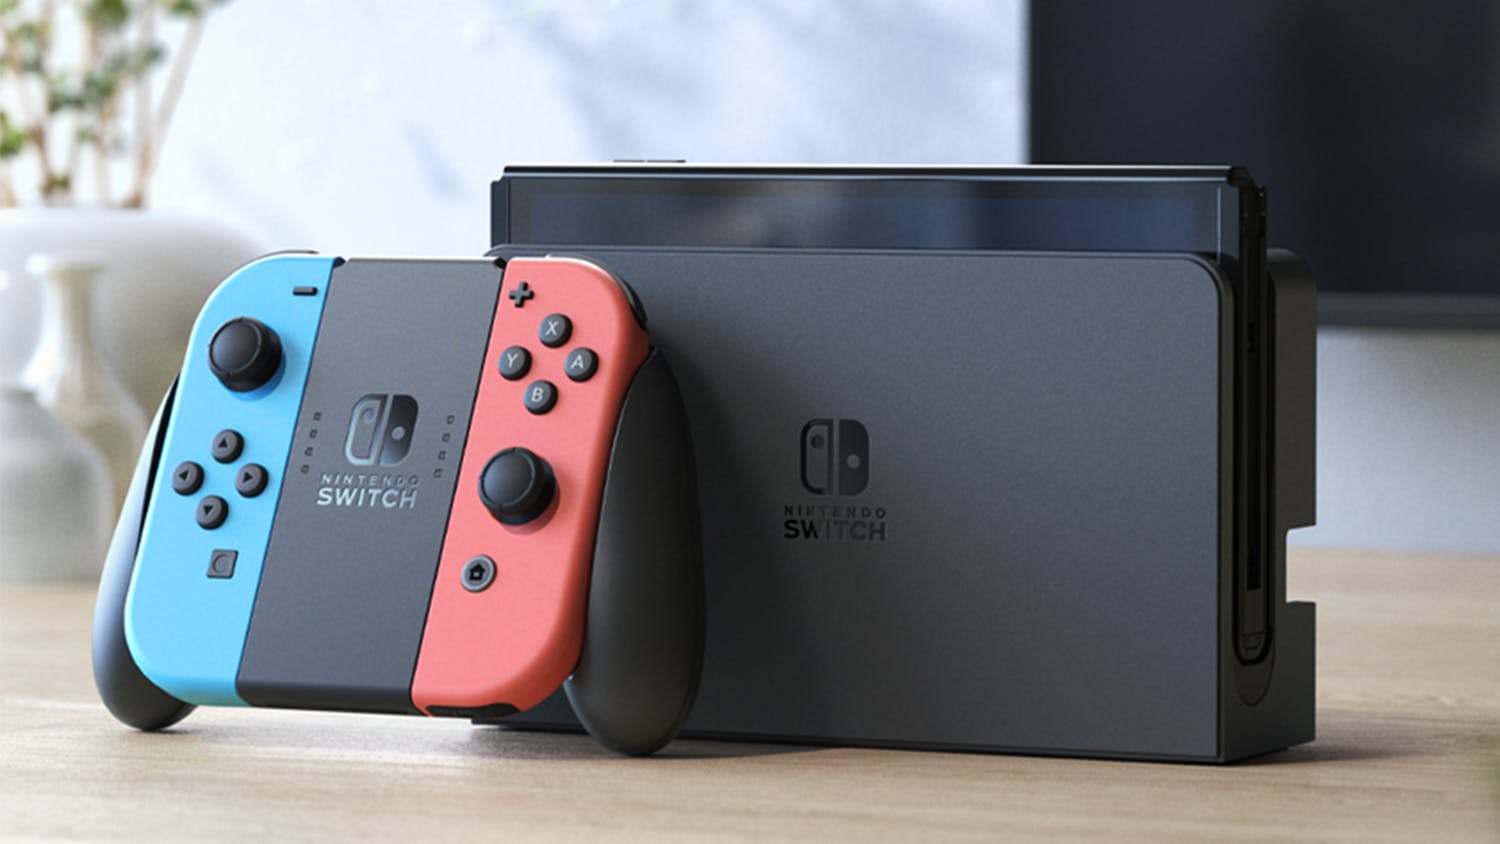 Nintendo Switch OLED Model - Neon Blue and Red Joy-Con, Black Dock